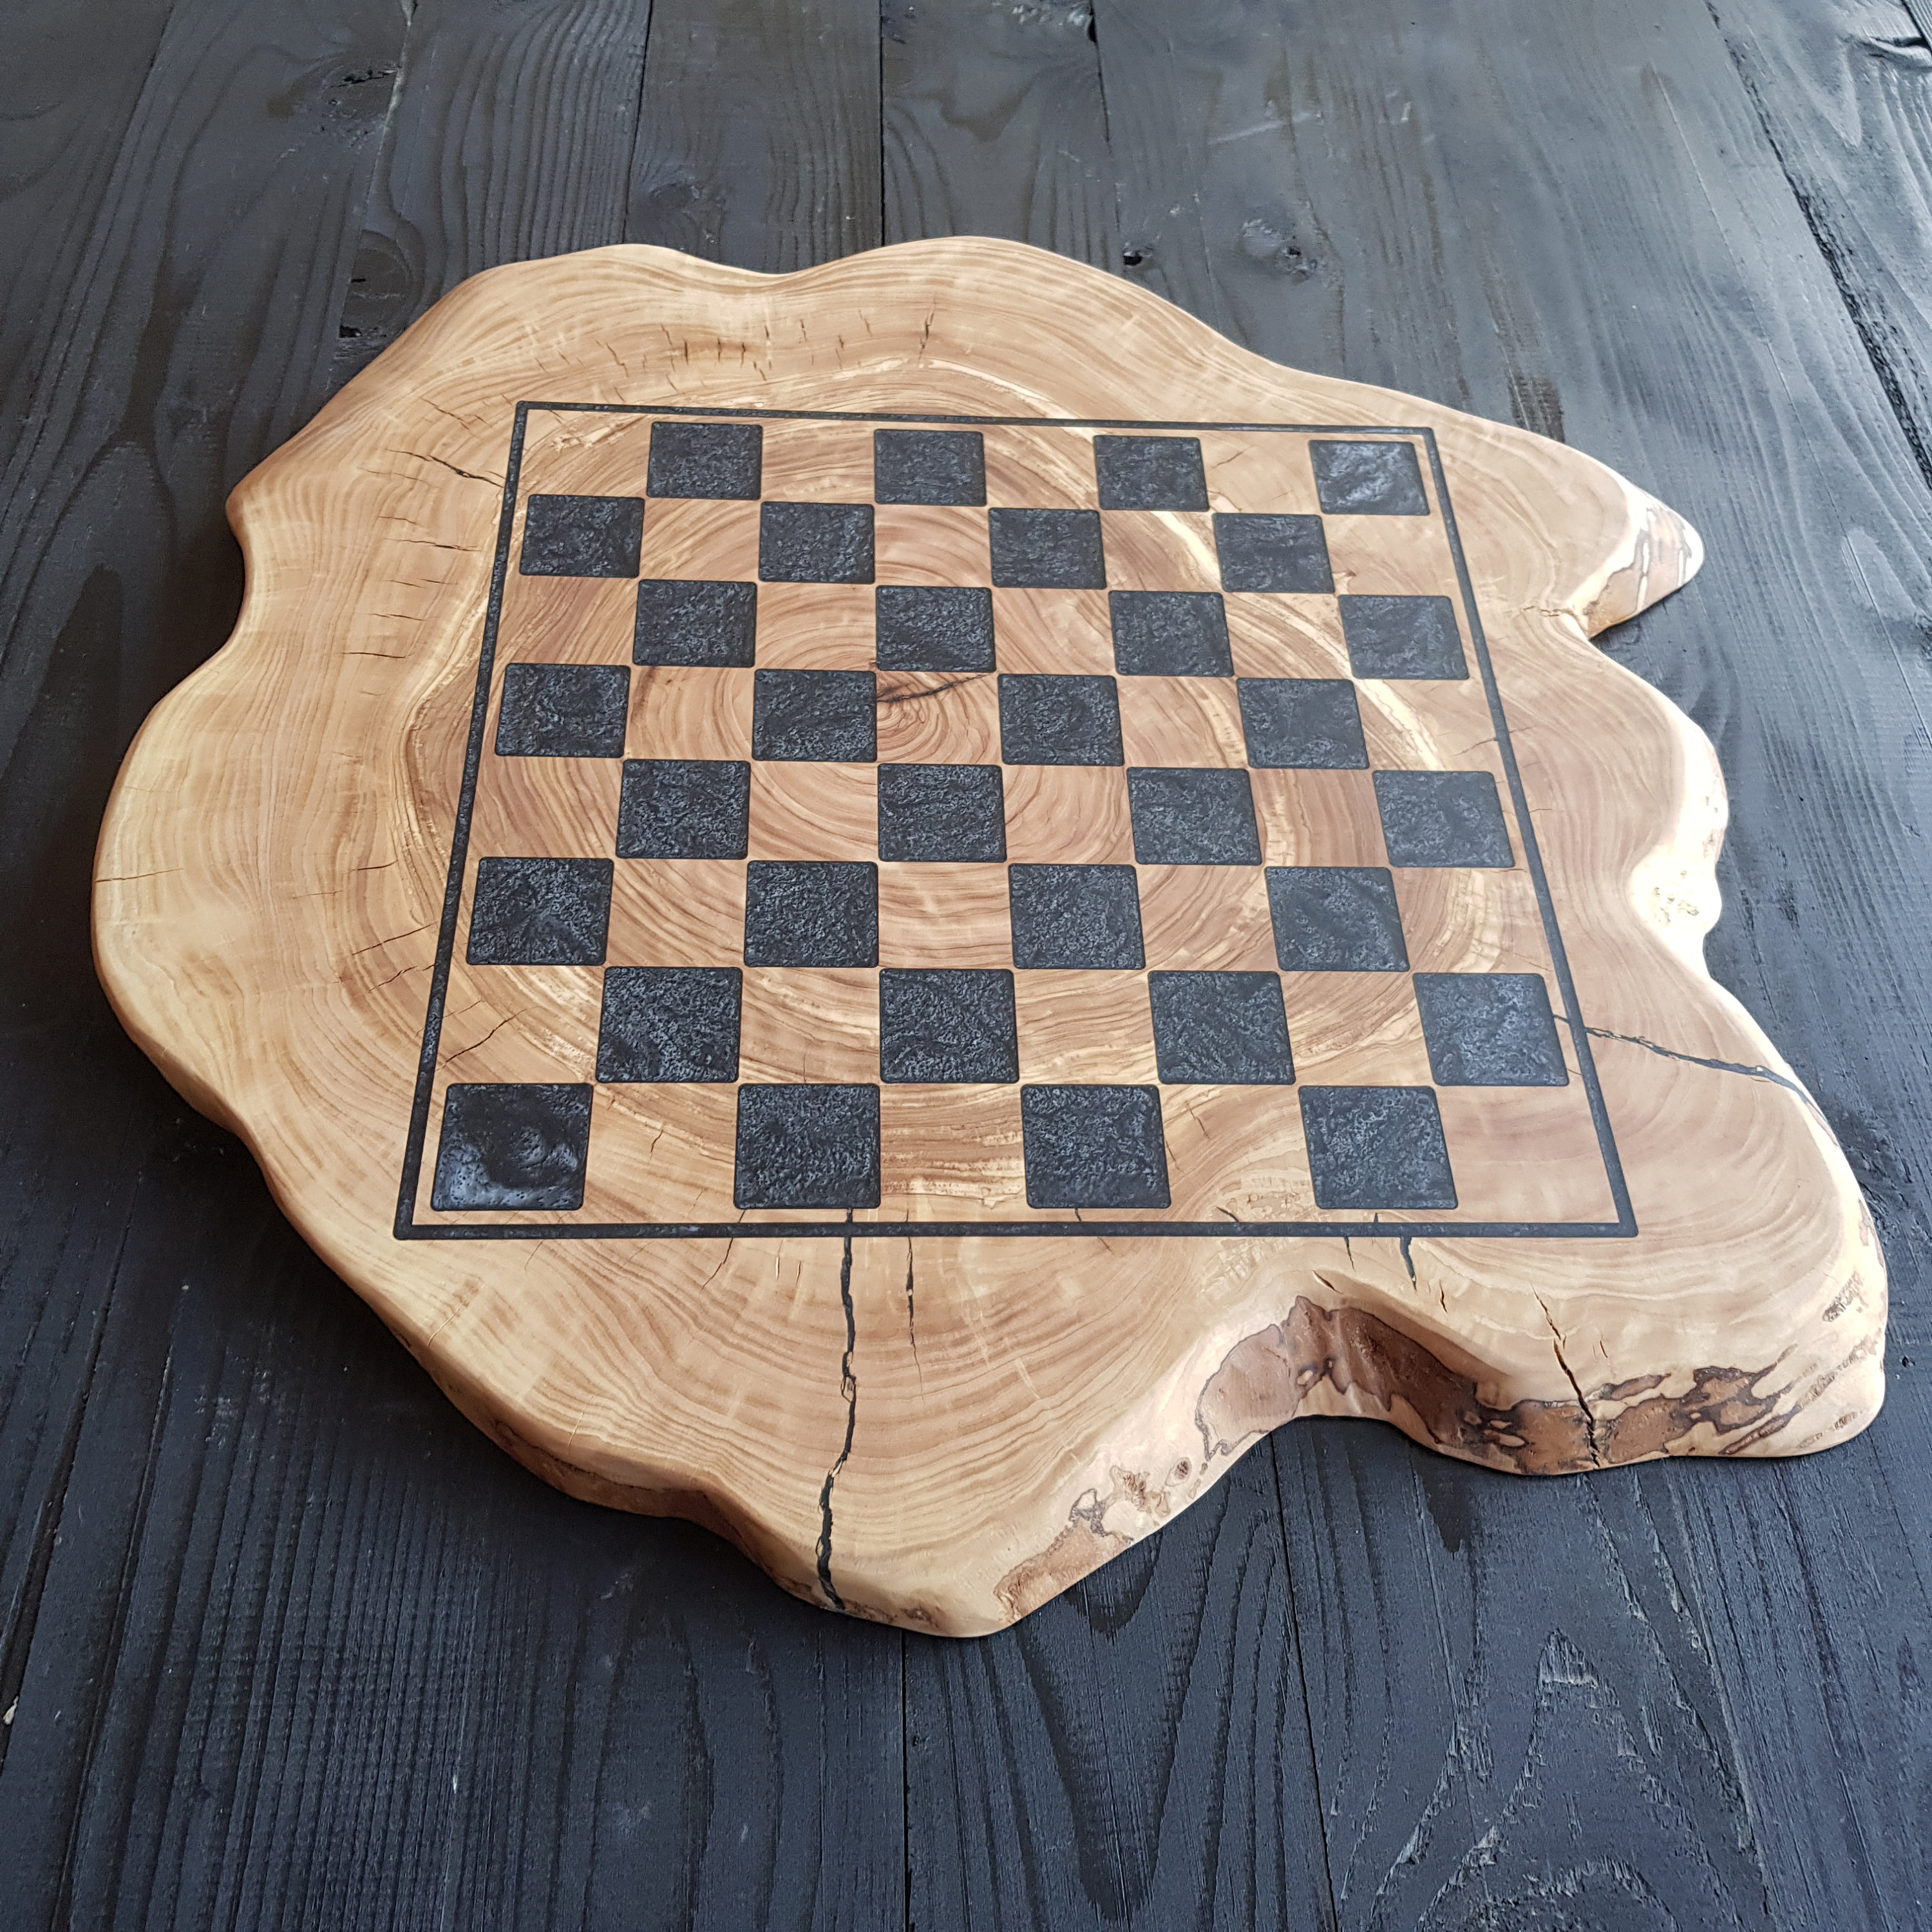 Large Olive wood Chess Board 16 x 16 Rustic Live Edge with 32  hand-crafted chess pieces + handmade Bag for pieces